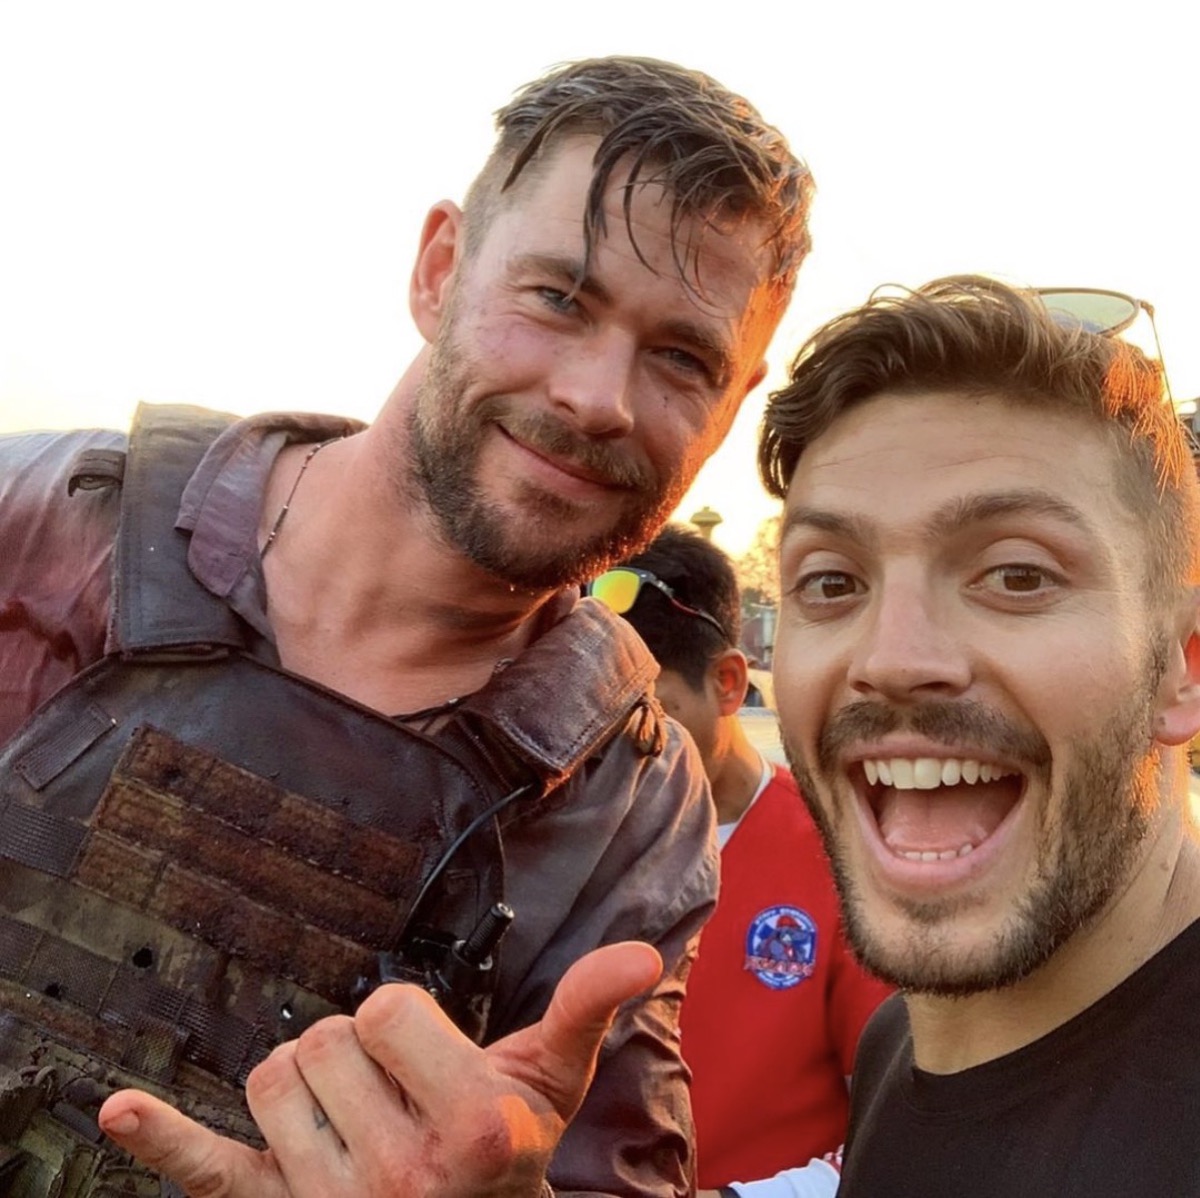 chris hemsworth and luke zocchi posing together outside in instagram screenshot